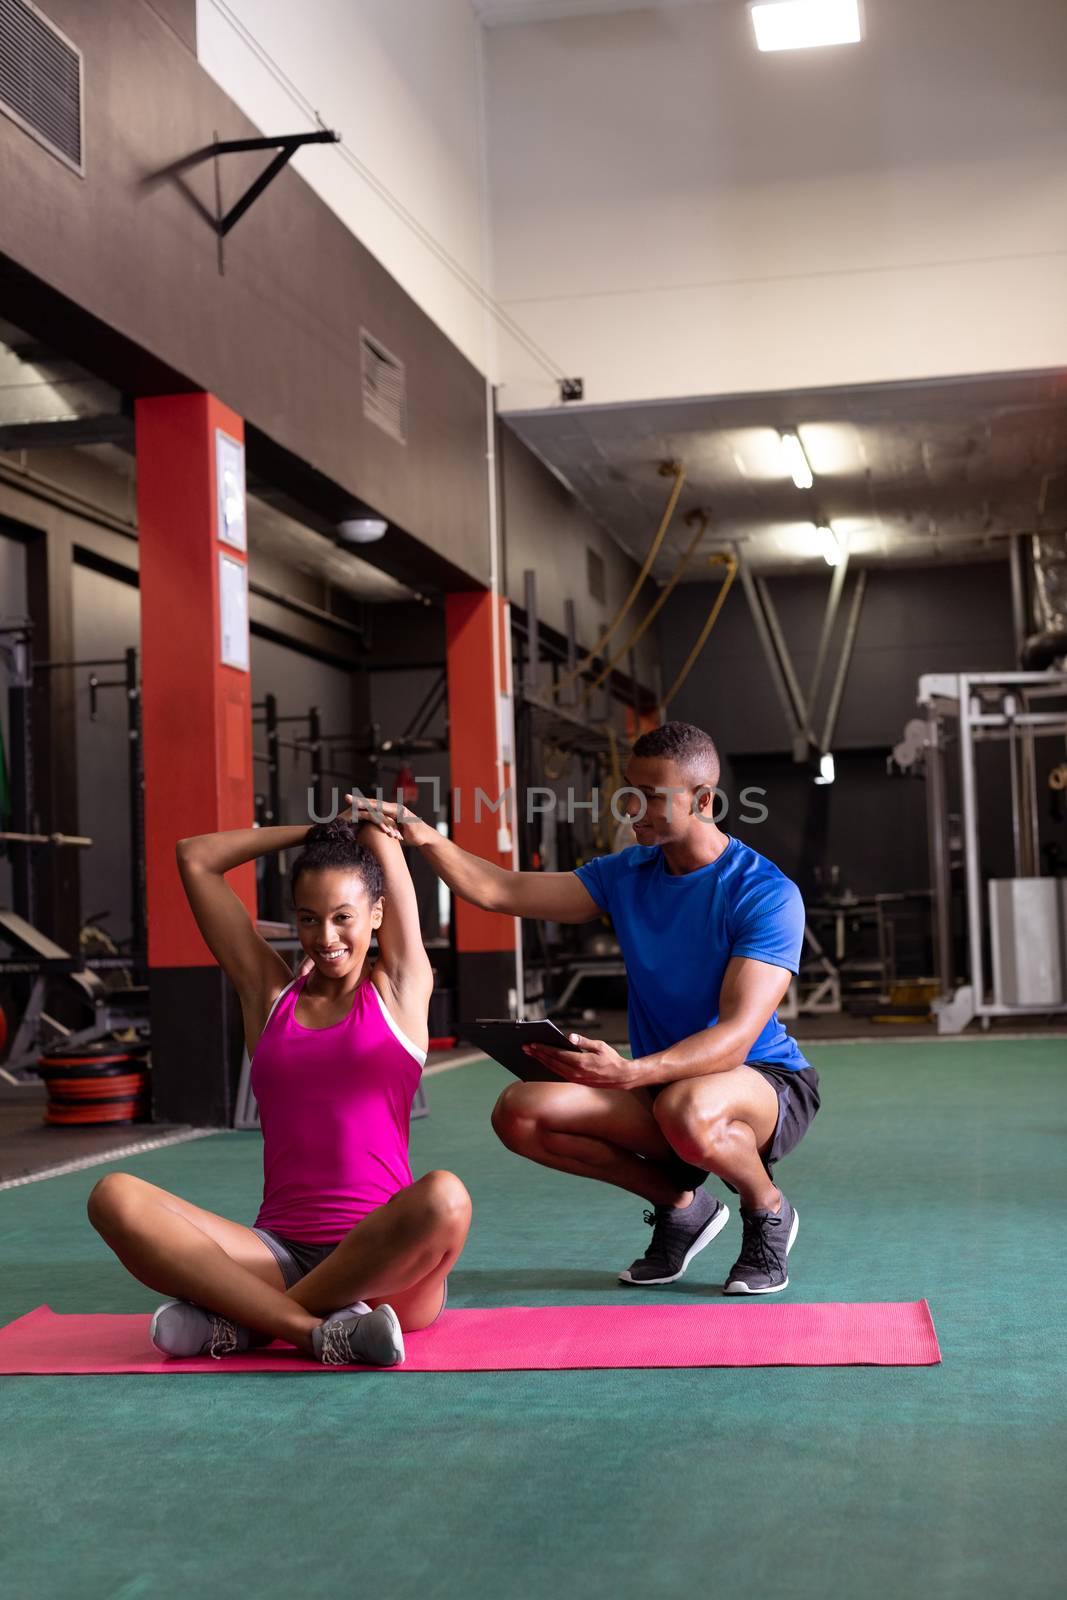 Front view of an African-American woman stretching while sitting crossed legged and an African-American man assists her inside a room at a sports center. Bright modern gym with fit healthy people working out and training. Bright modern gym with fit healthy people working out and training